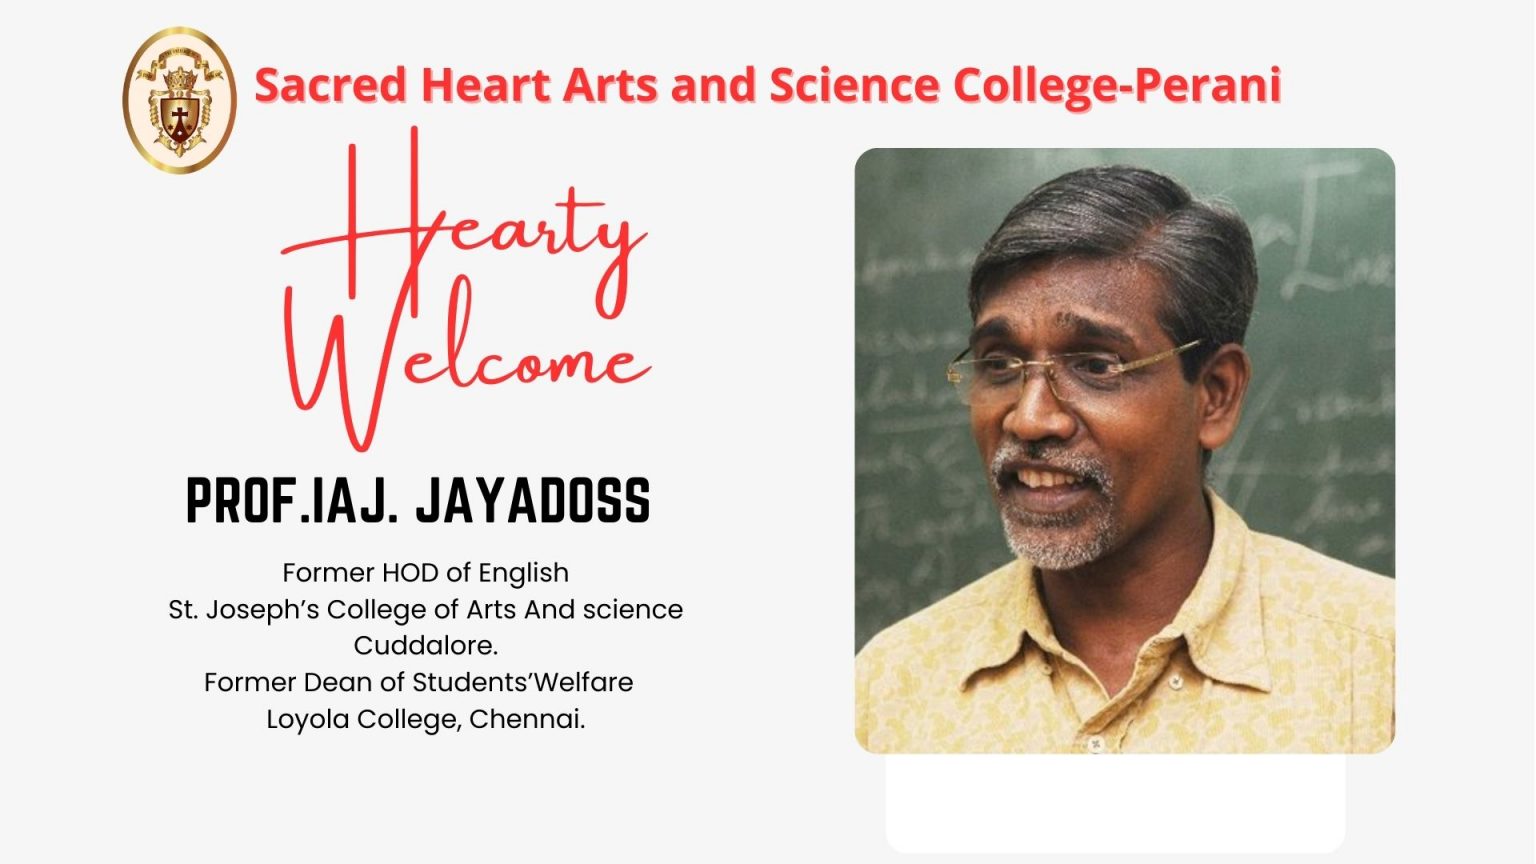 Sacred Heart Arts and Science College-Perani